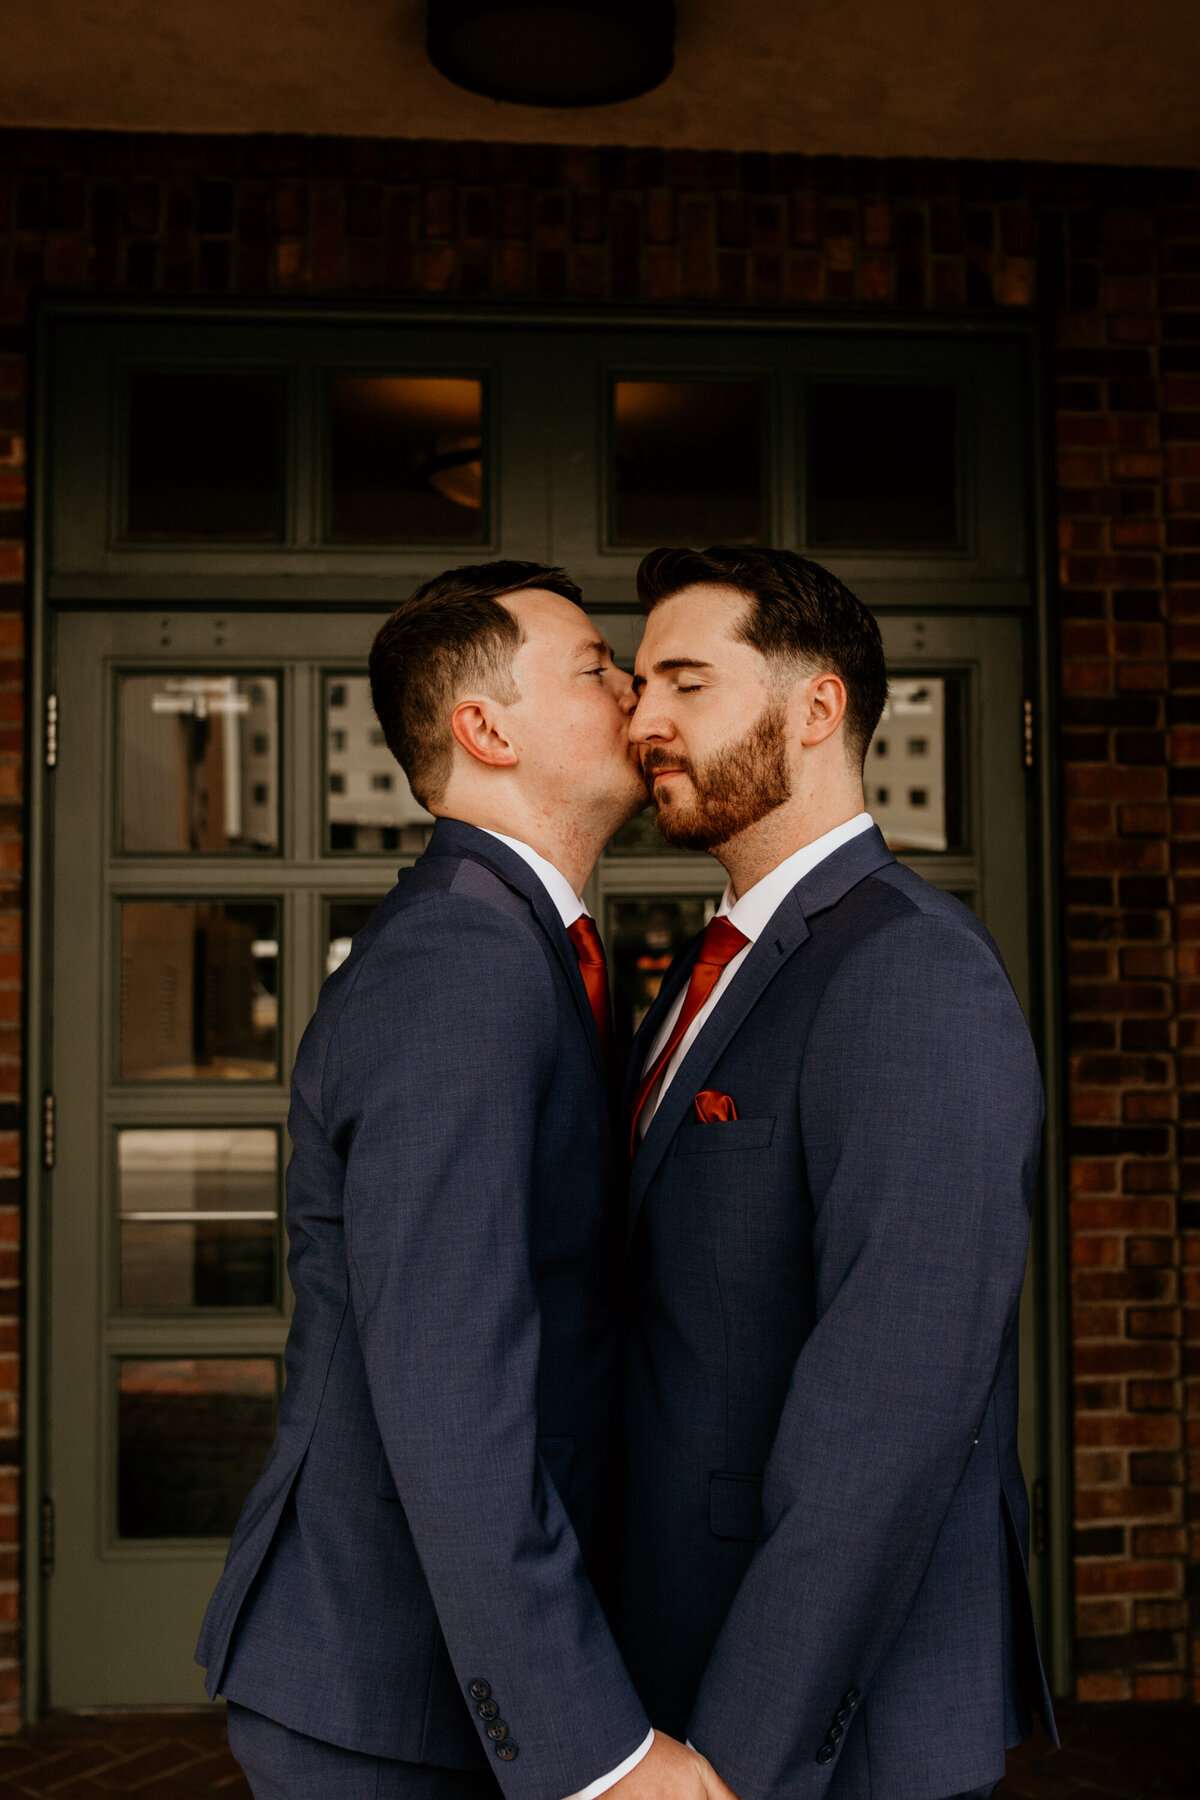 man kissing his grooms cheek in front of a downtown building in Albuquerque